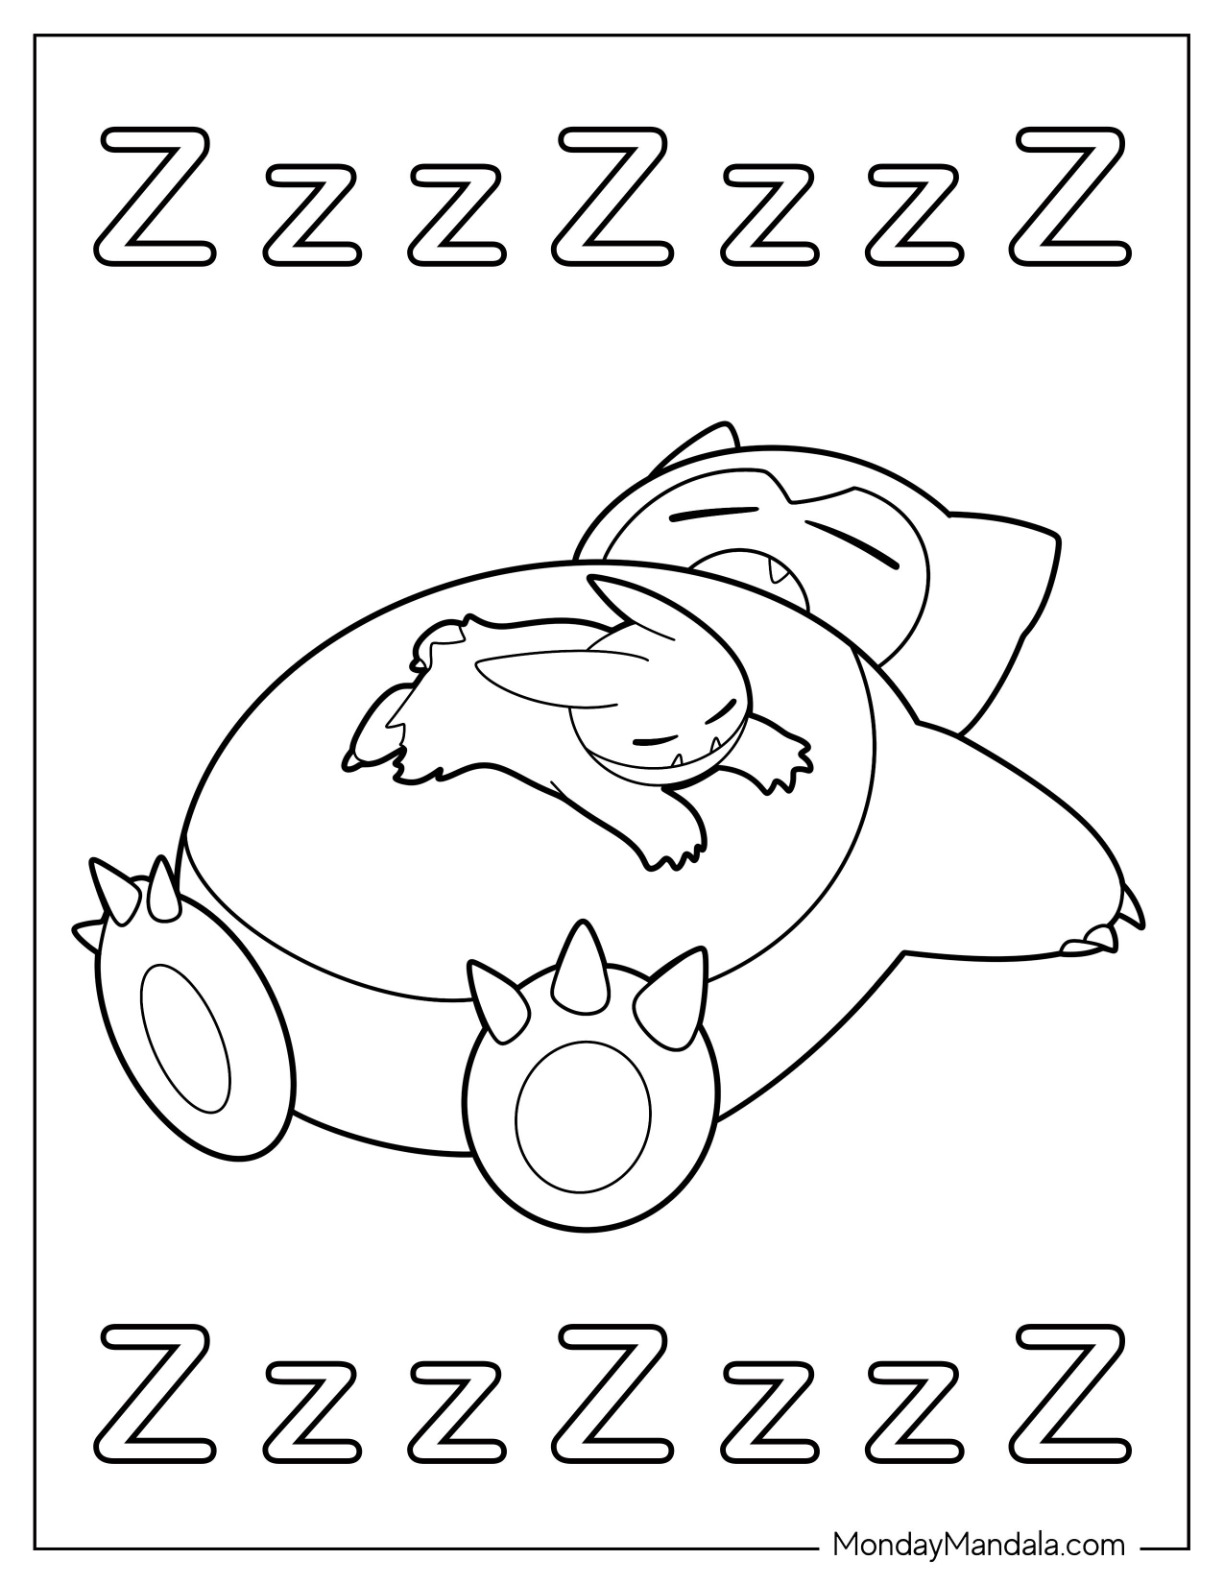 Snorlax coloring pages free pdf printables